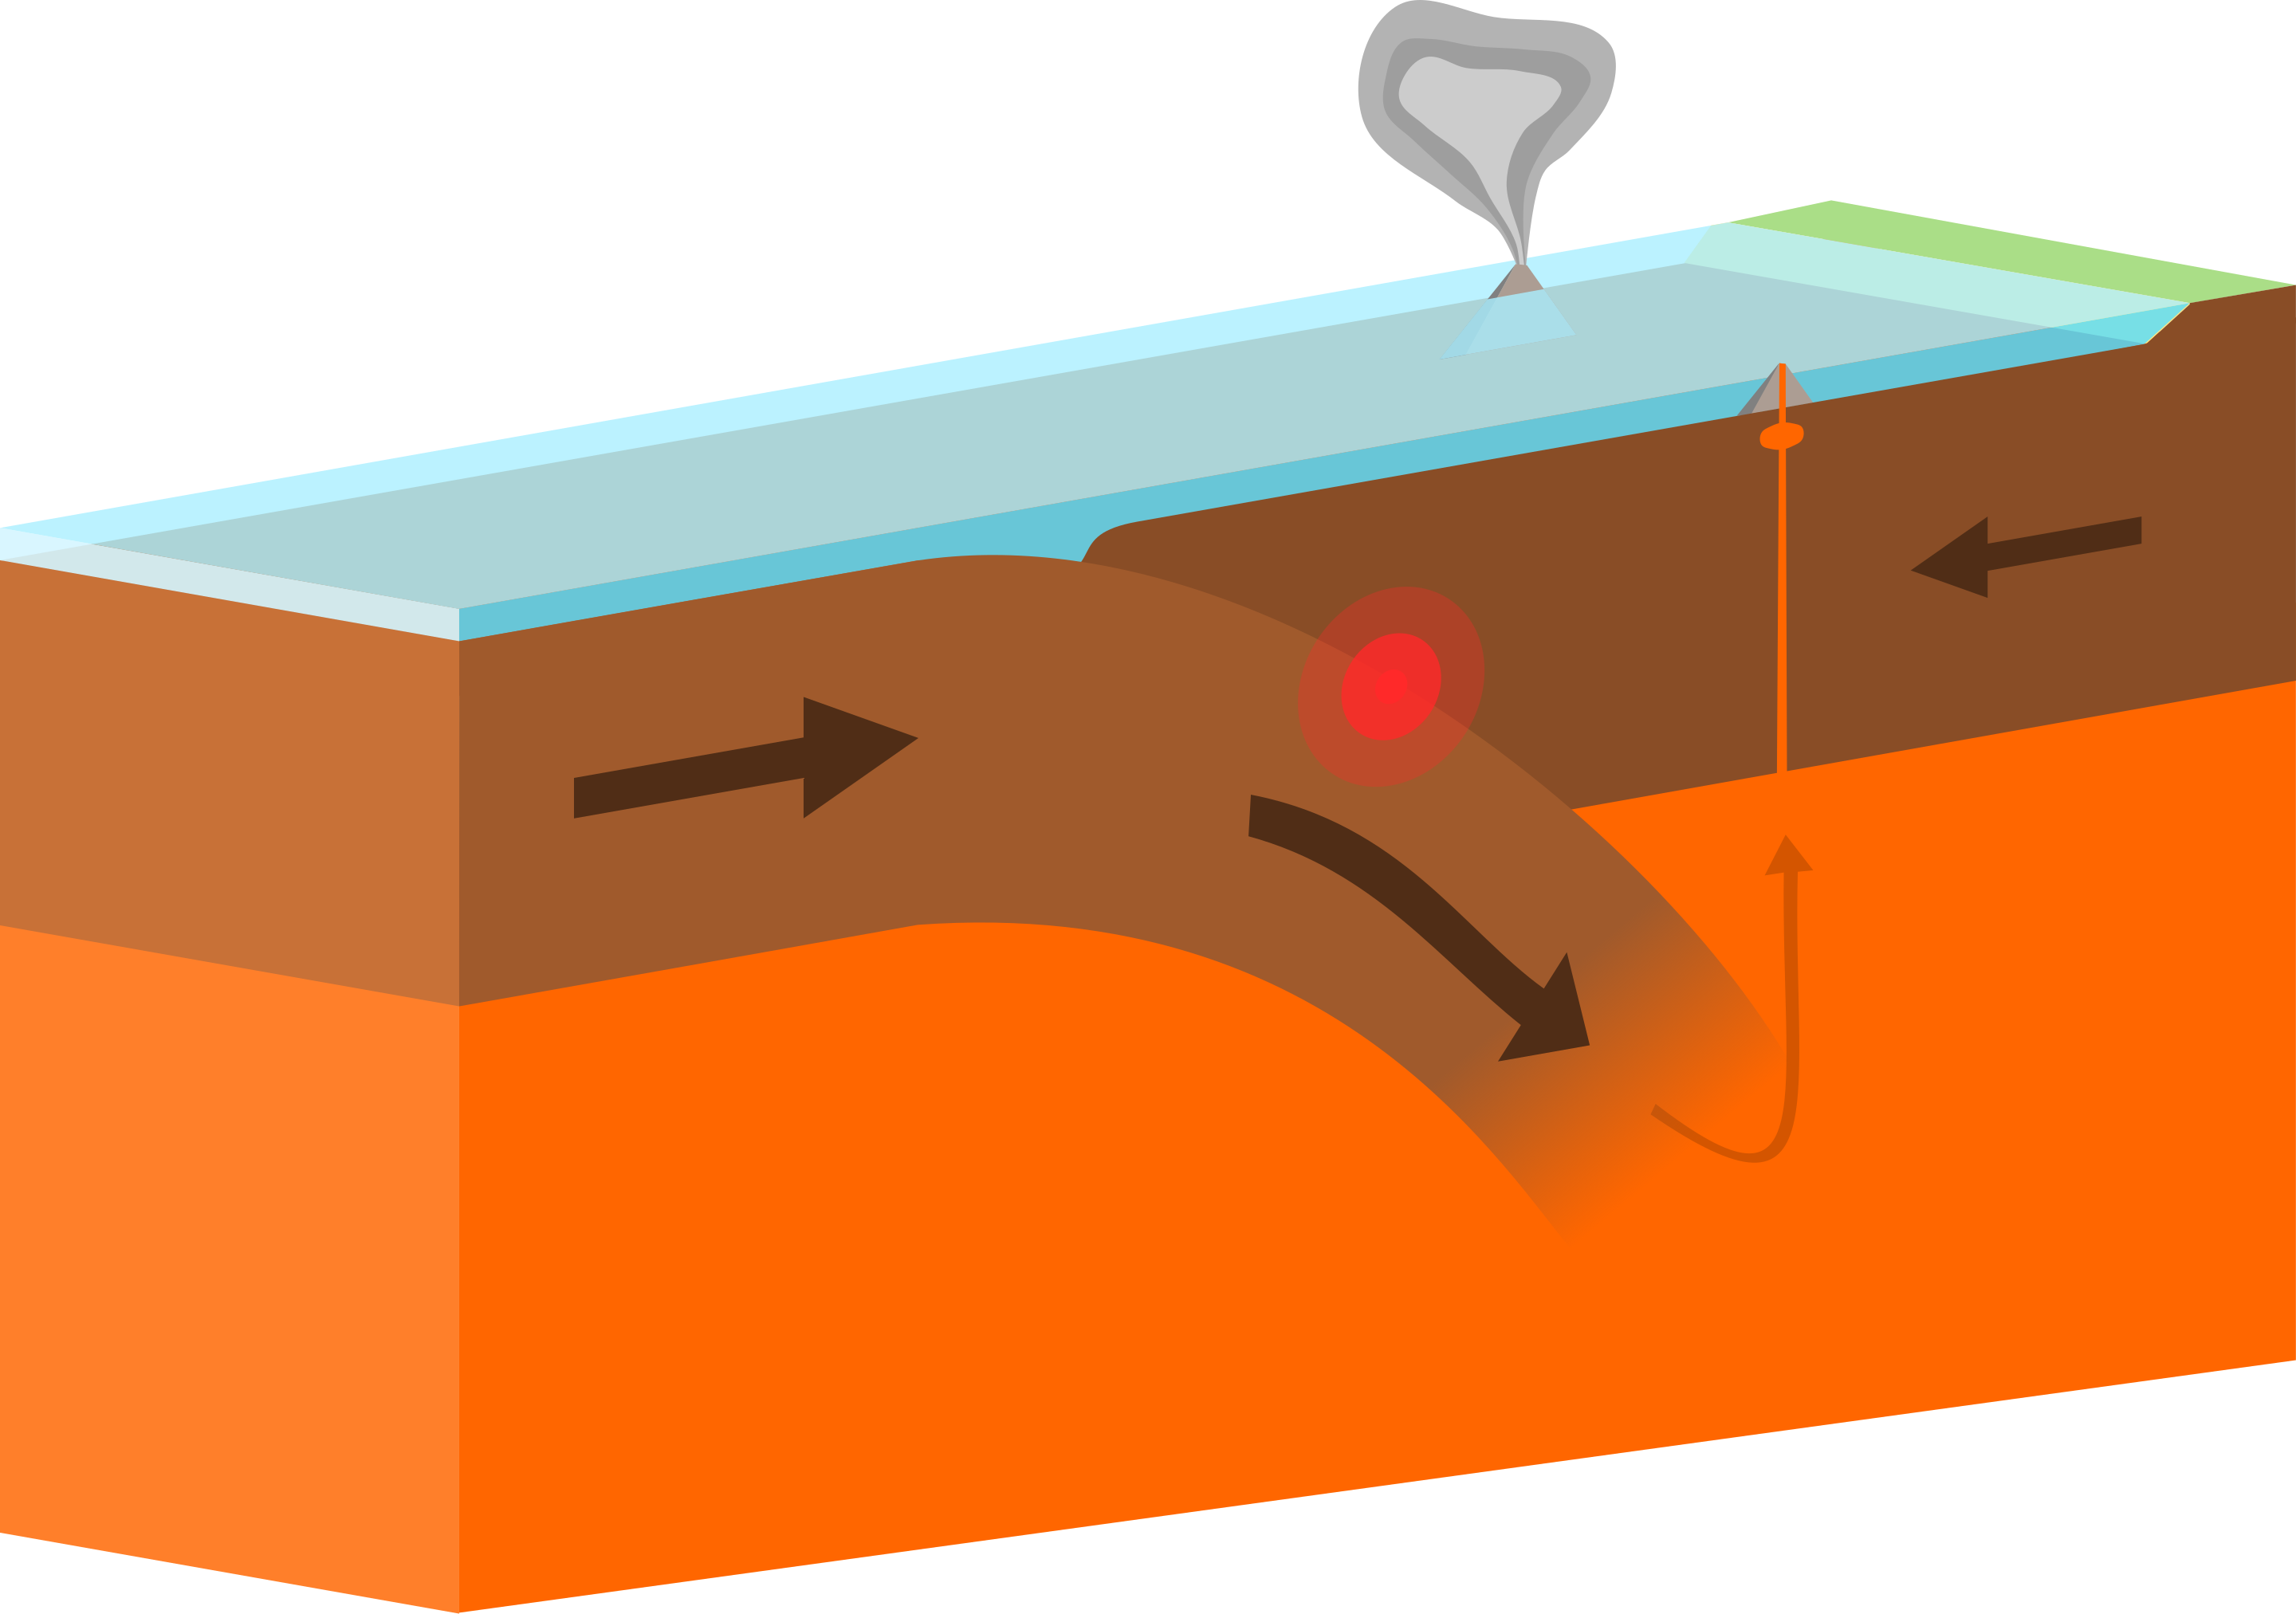 Block diagram of oceanic lithosphere colliding and subducting beneath another plate of oceanic lithosphere.